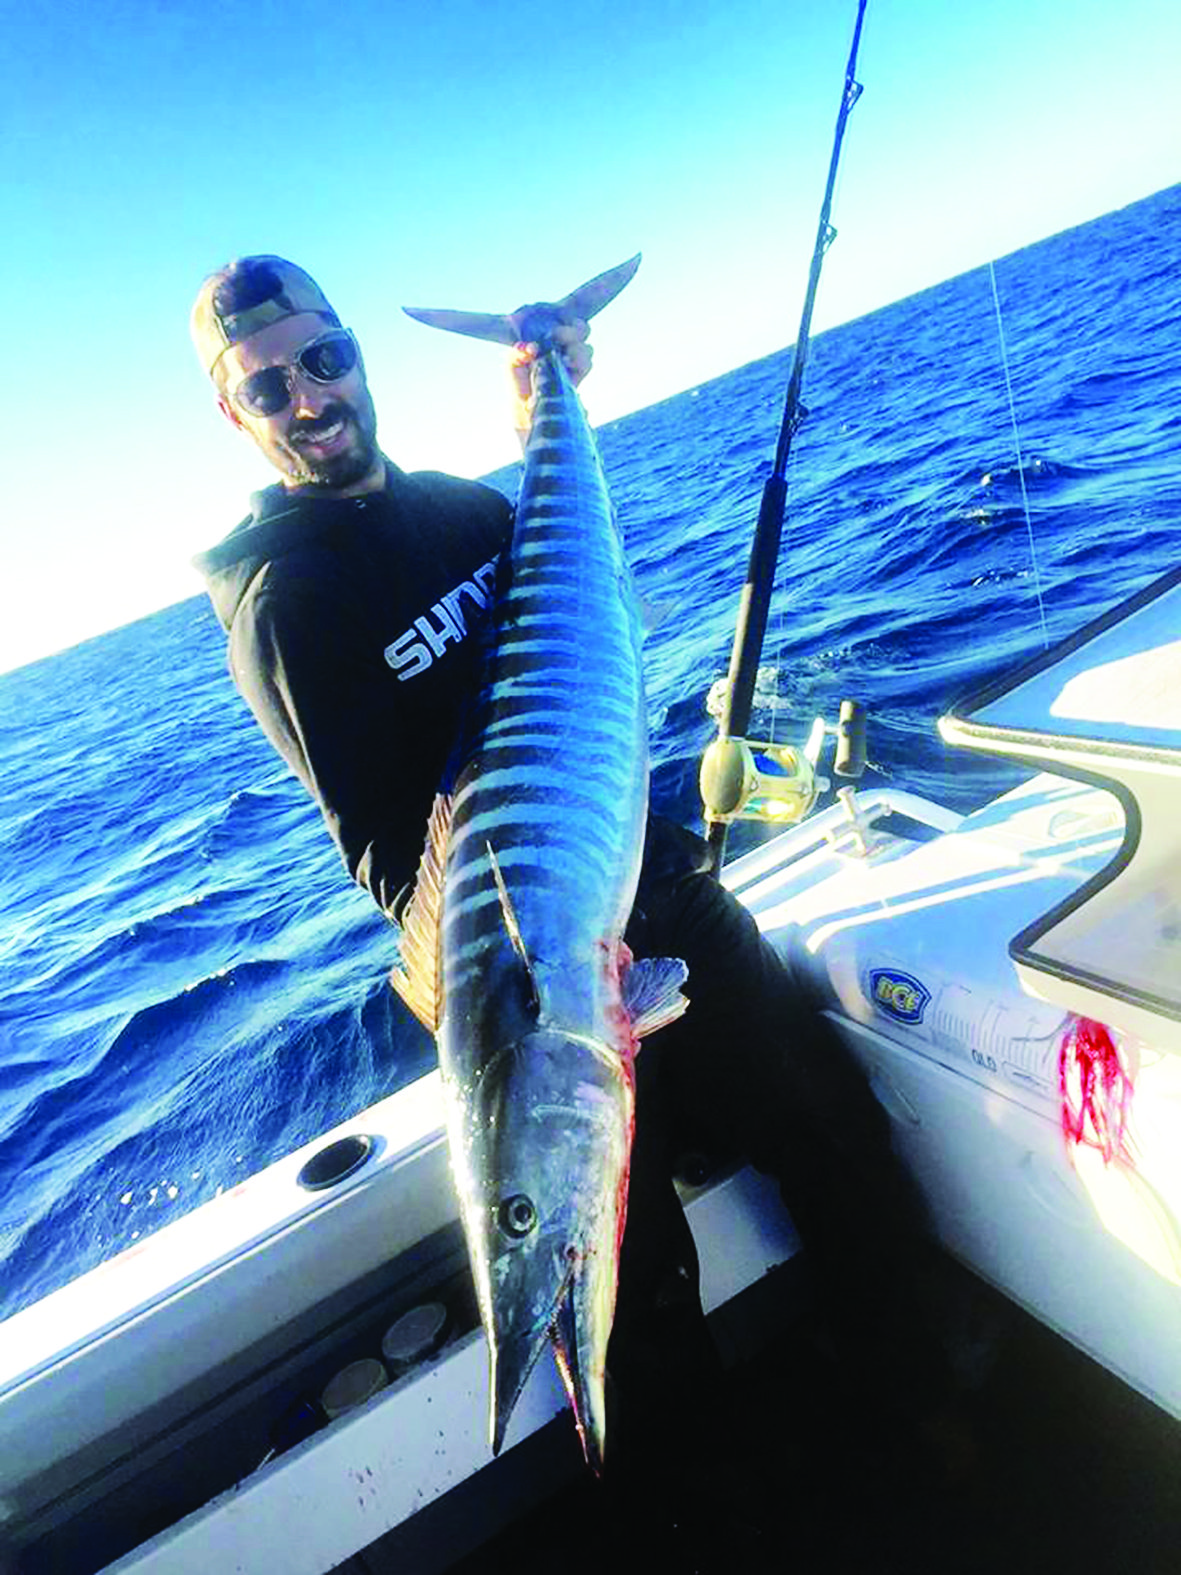 This stonker wahoo was hooked on a trolled hex head around the group off Stradbroke Island in mid-winter last year.